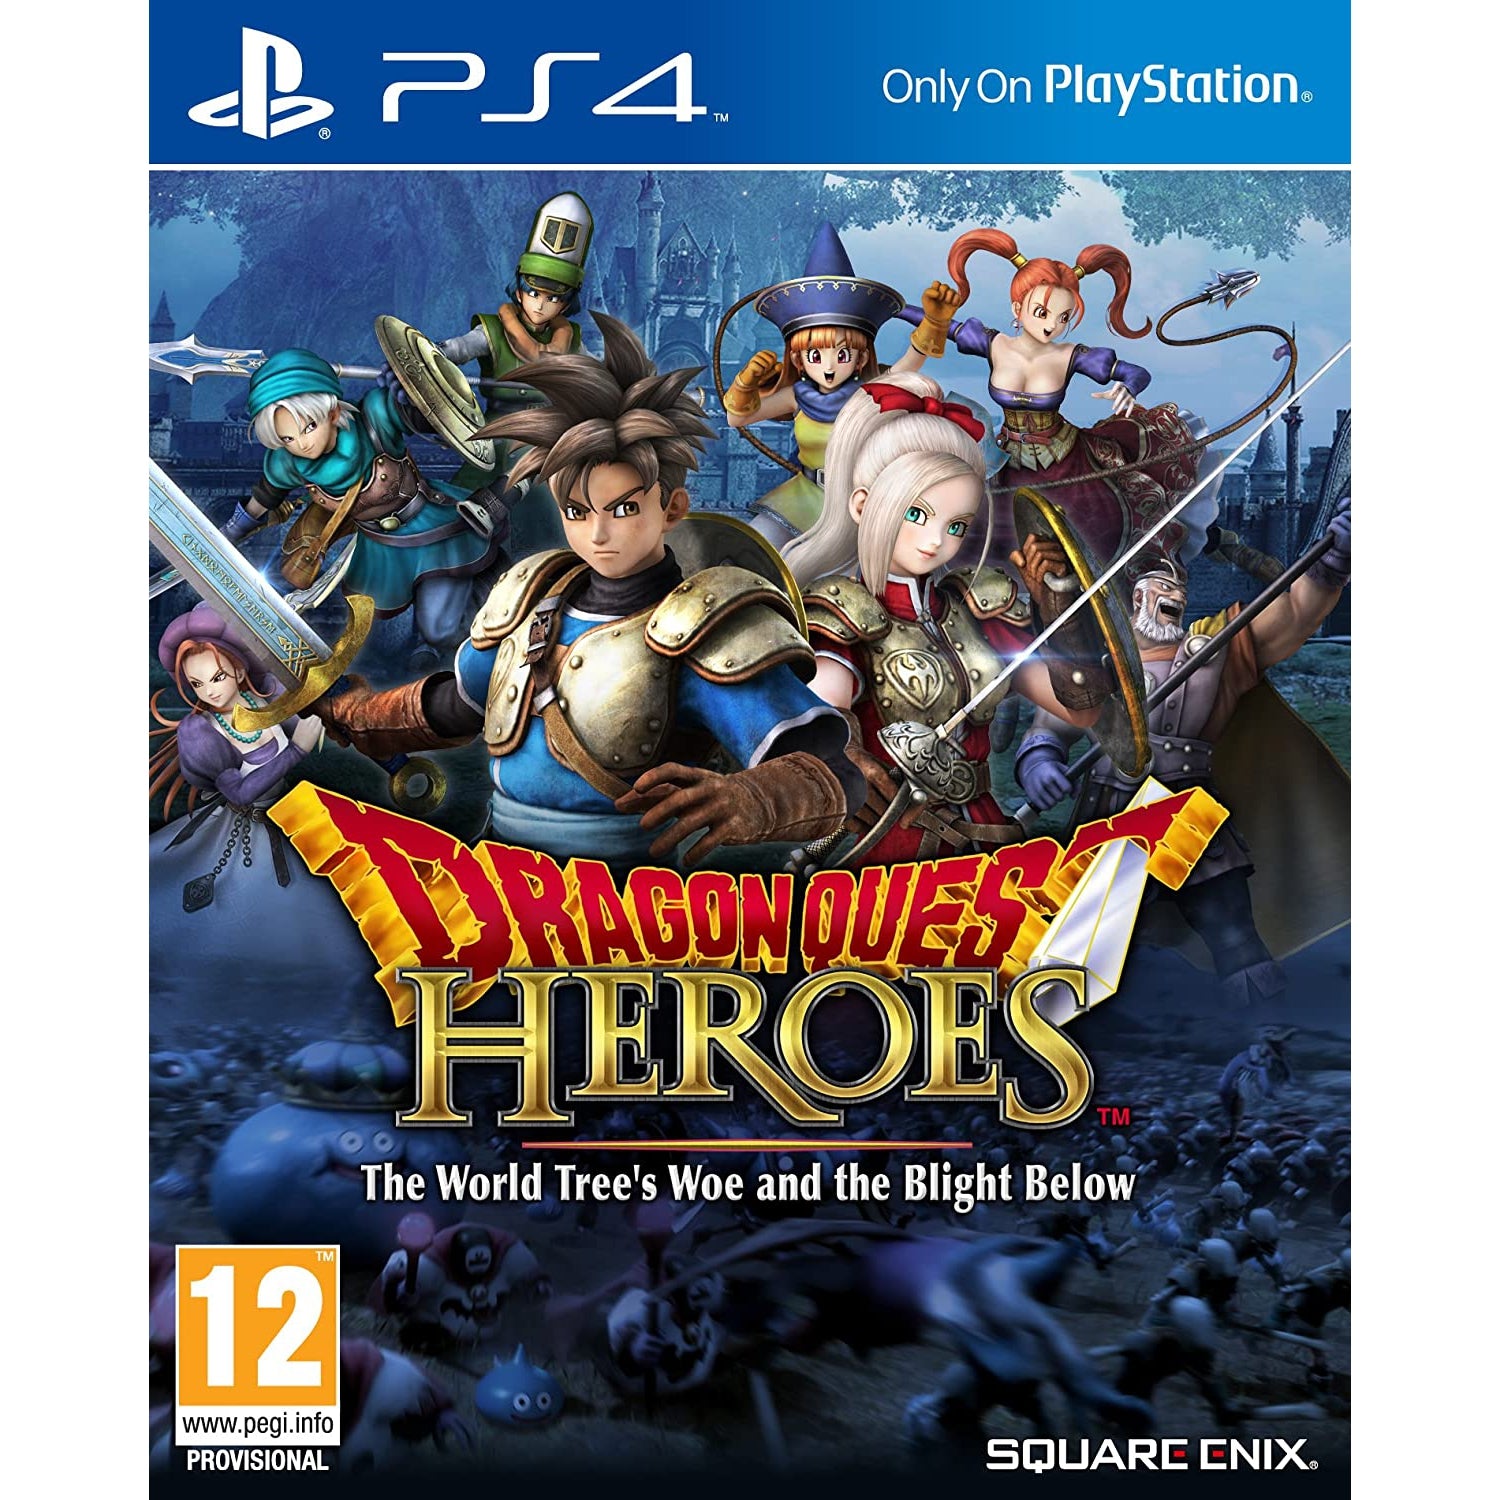 Dragon Quest Heroes: The World Tree's Woe and The Blight Below (PS4) - Refurbished Excellent